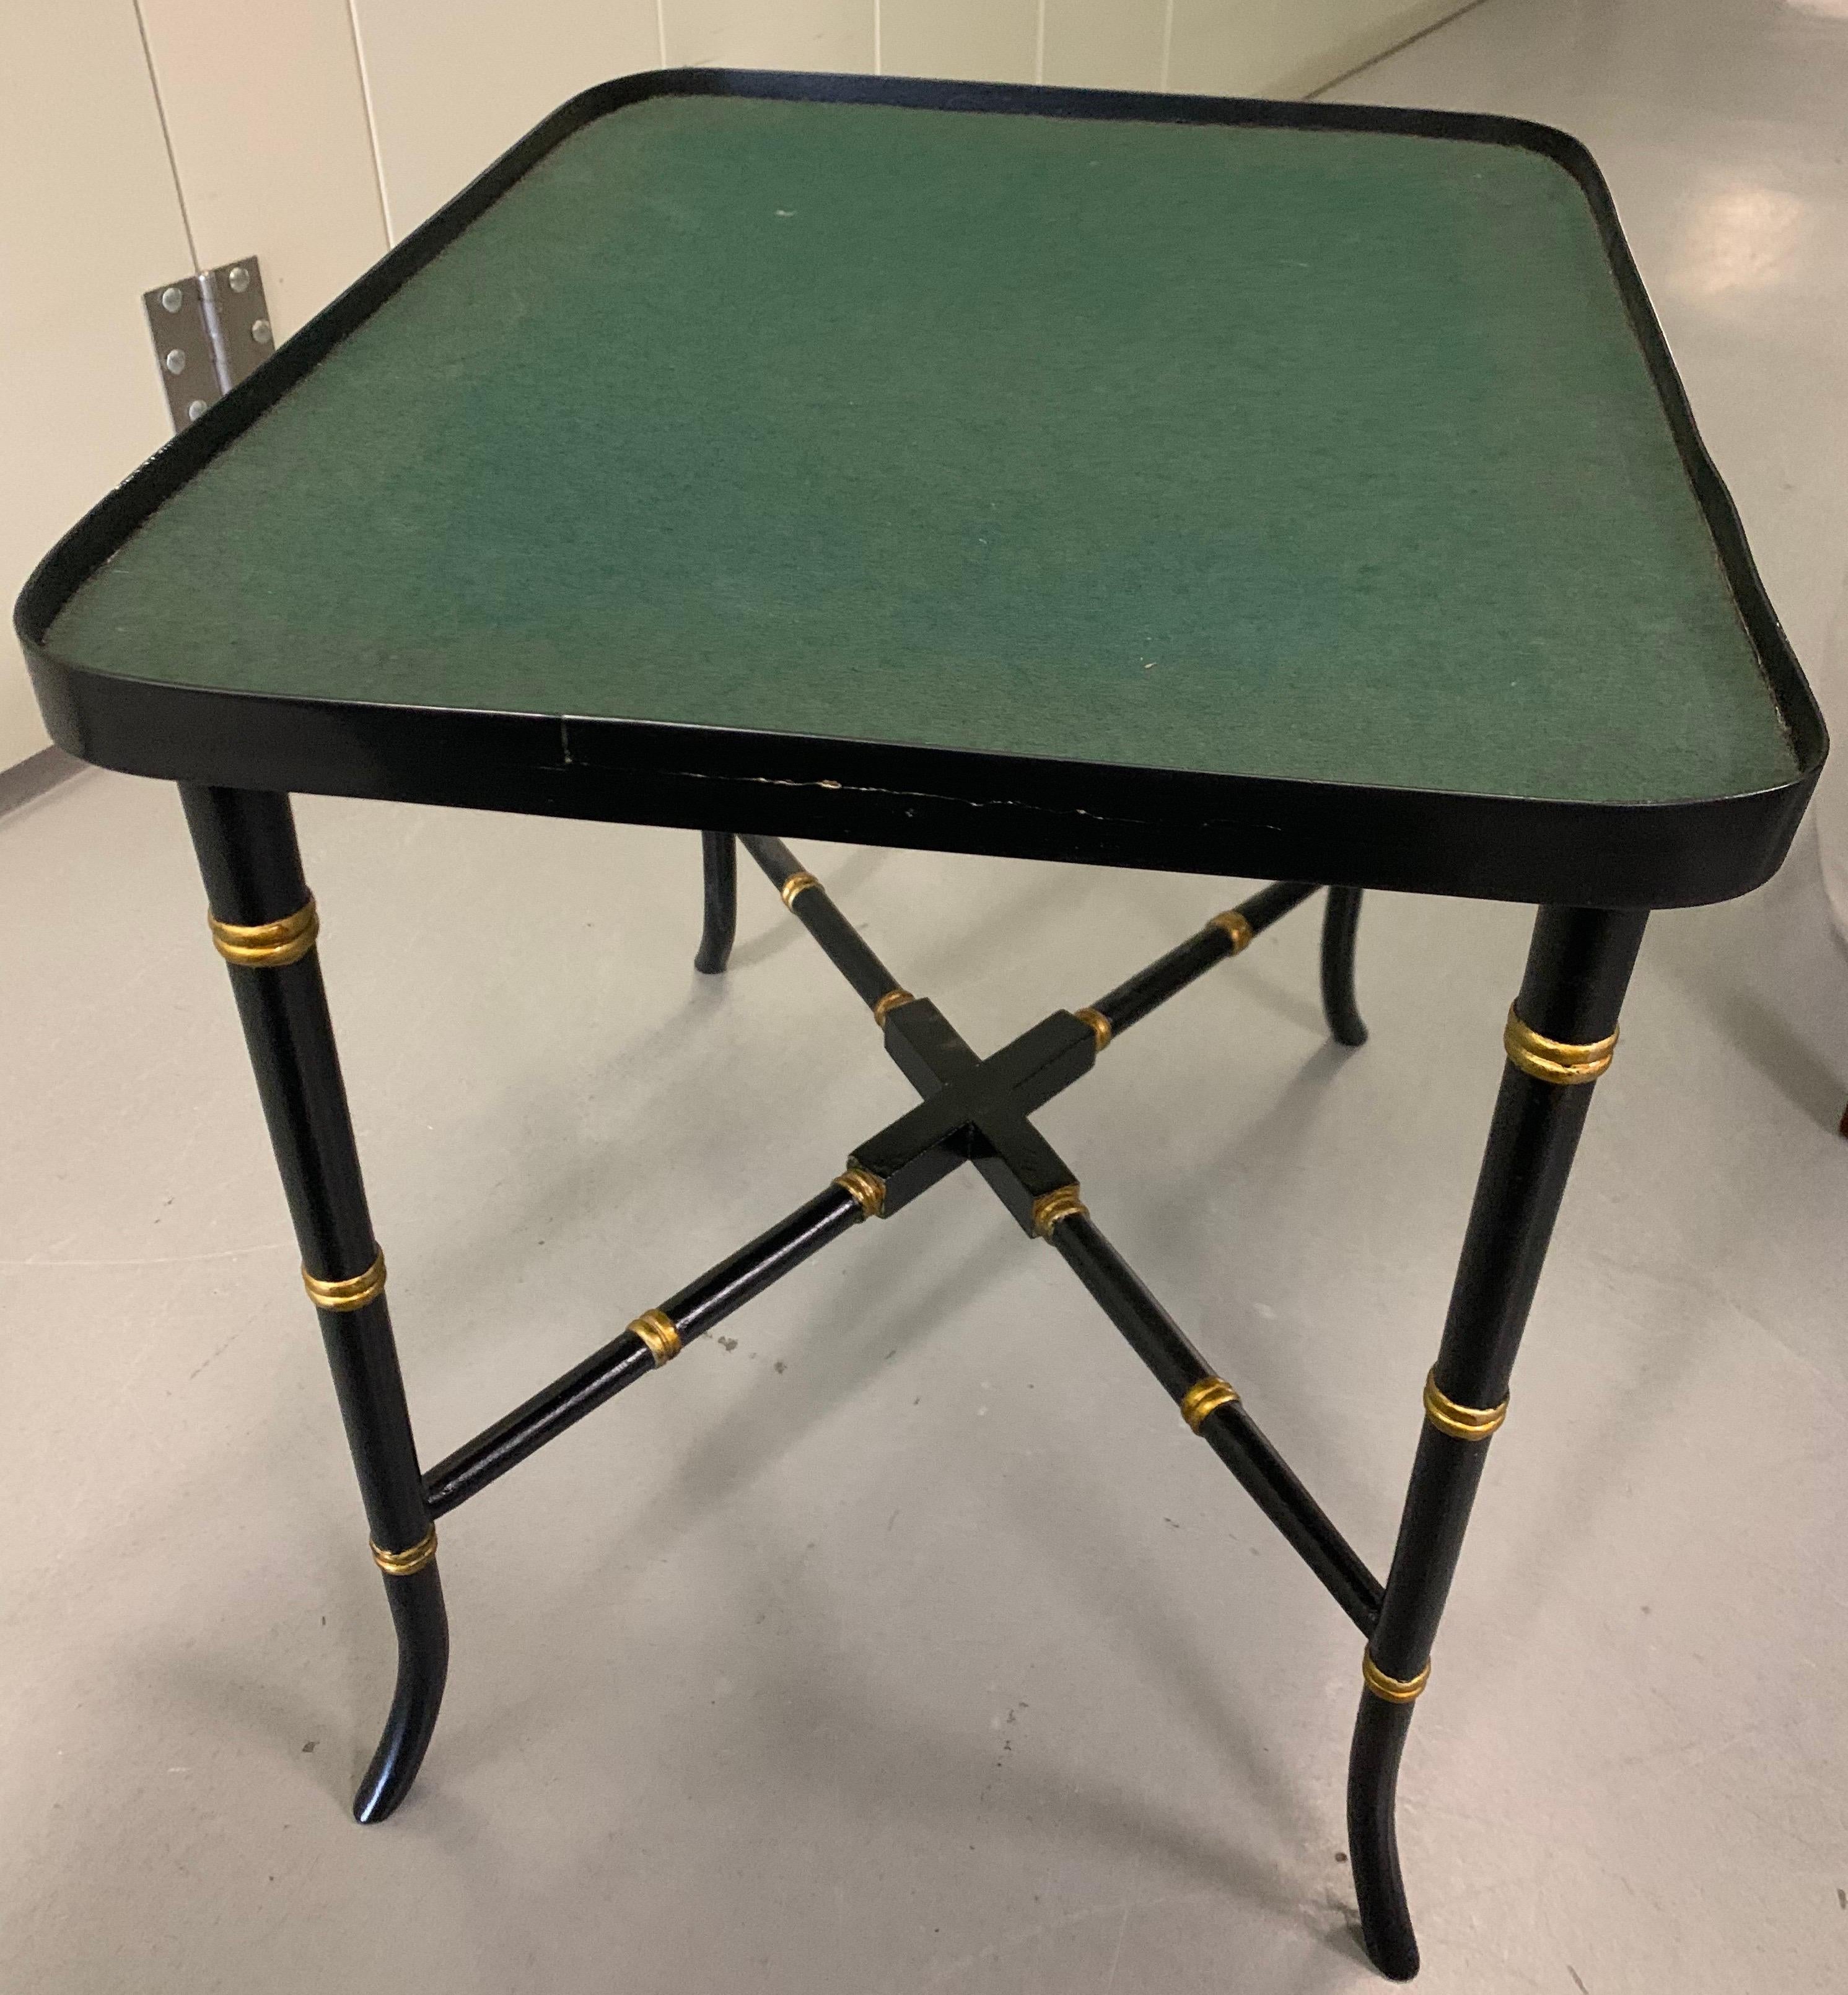 20th Century English Chinoiserie Black & Gold Papier Mâché Tray Table